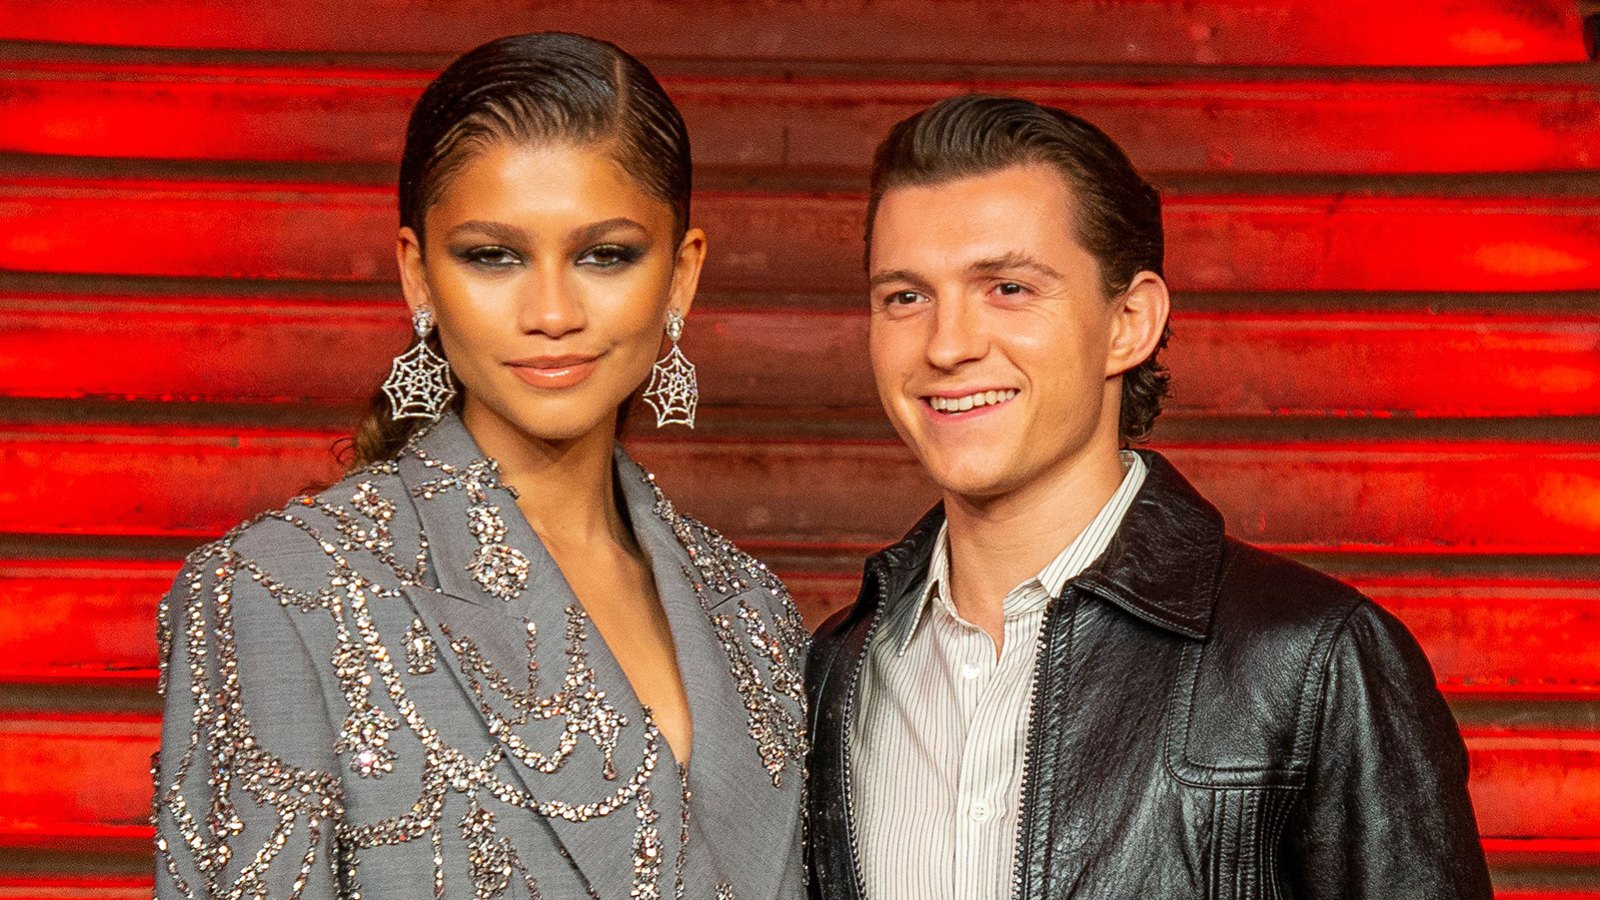 Tom Holland and Girlfriend Zendaya Hold Hands During Parisian Date at the Louvre: Photo